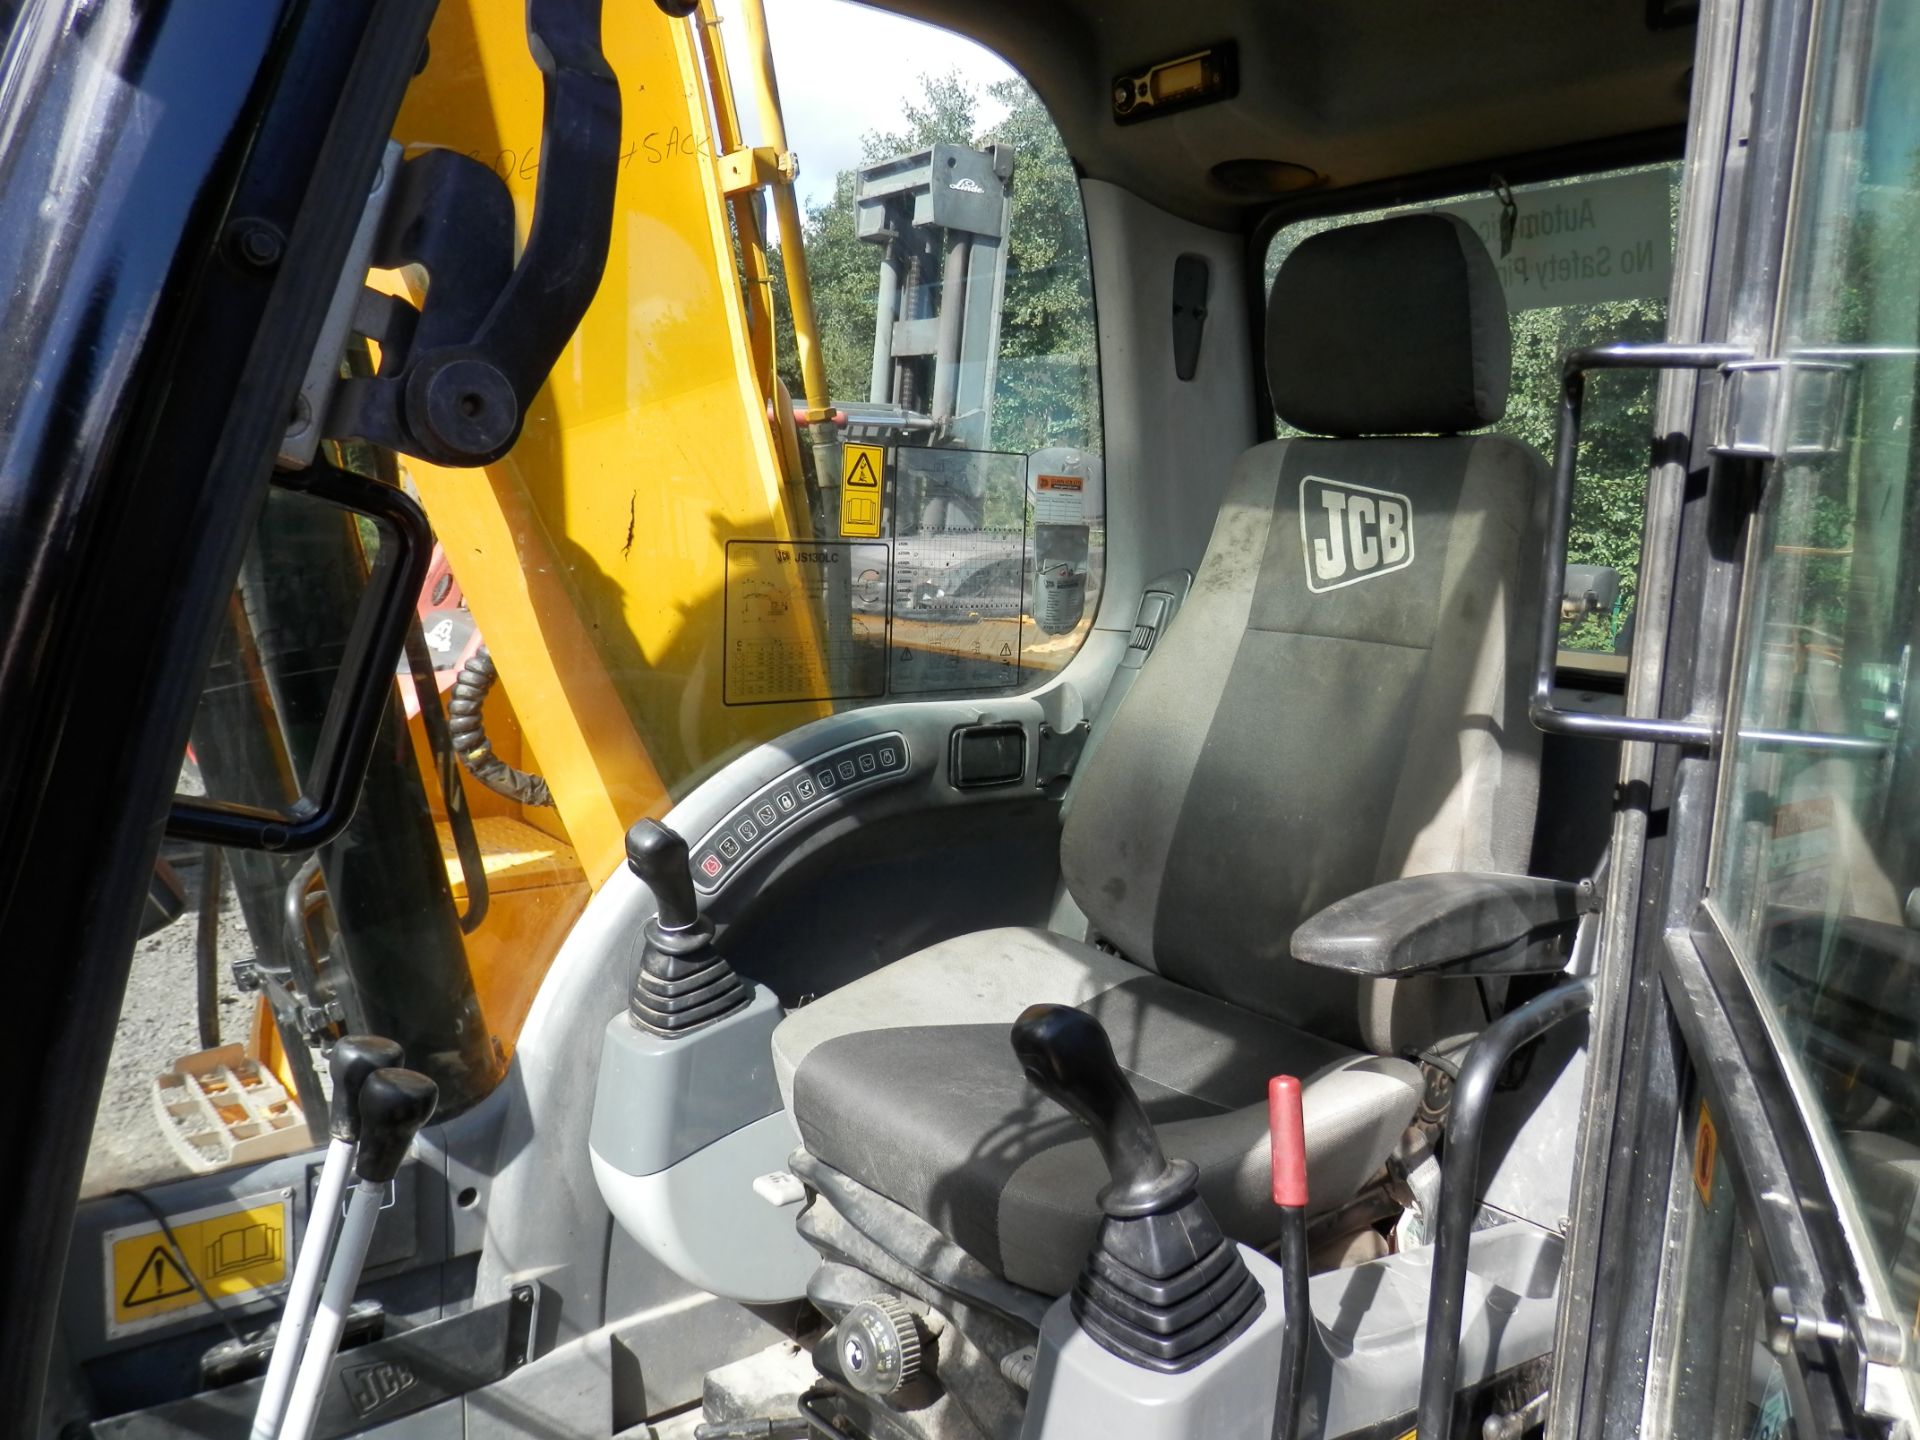 2010 JCBJS130 13.4 TONNE TRACKED DIGGER, ALL WORKING READY FOR WORK. 7806 WORKING HOURS. - Image 7 of 12